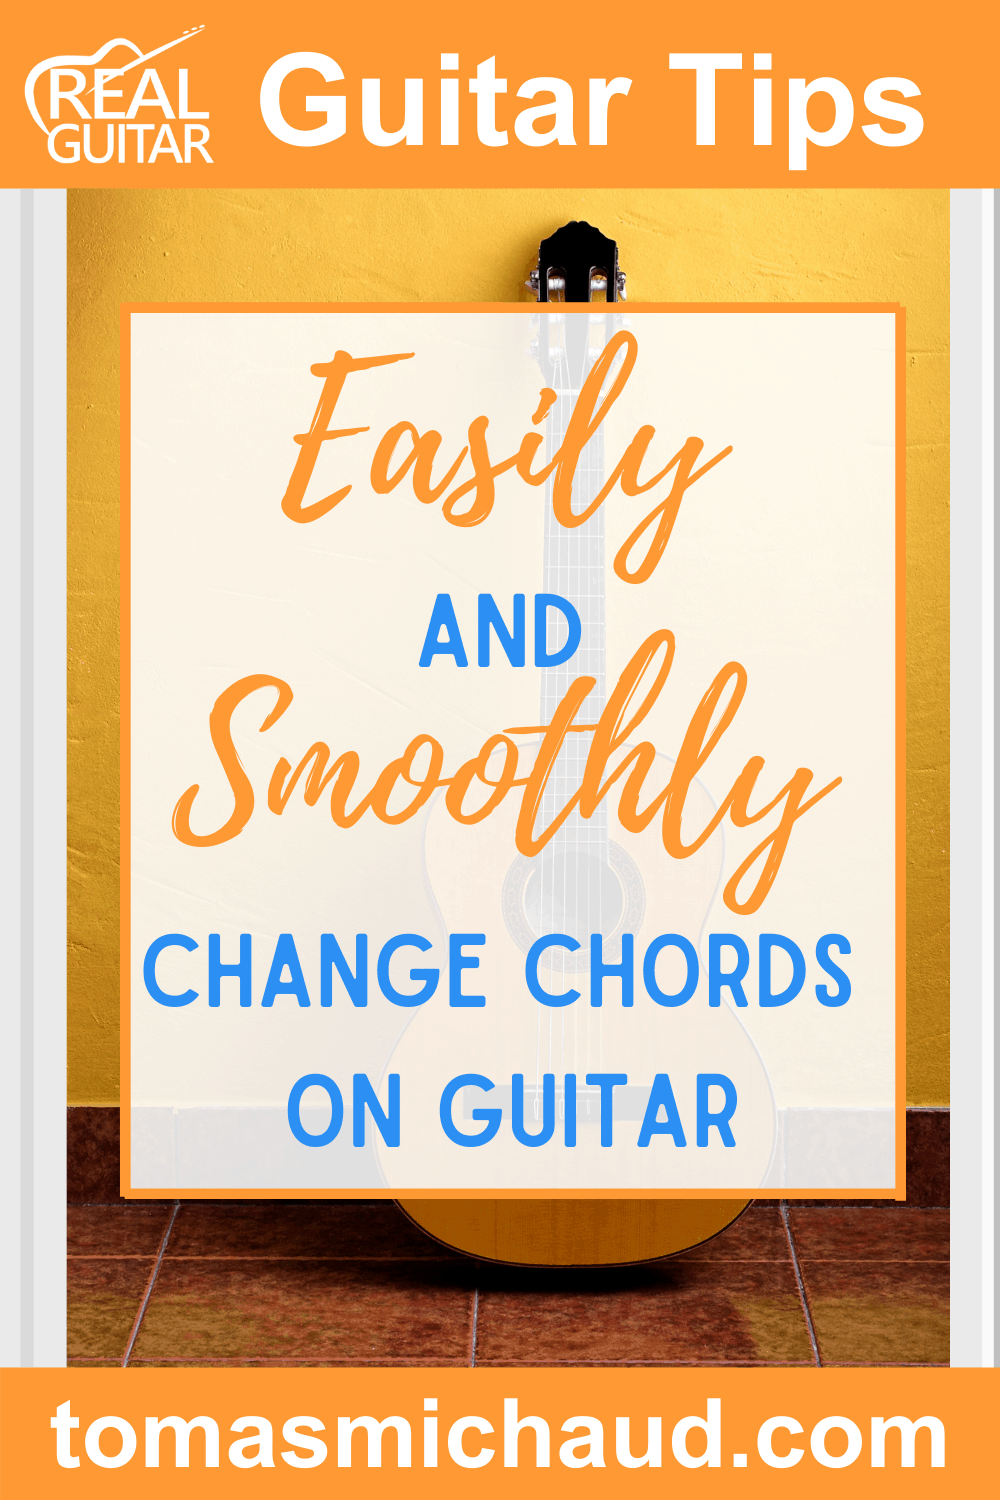 Easily And Smoothly Change Chords On Guitar